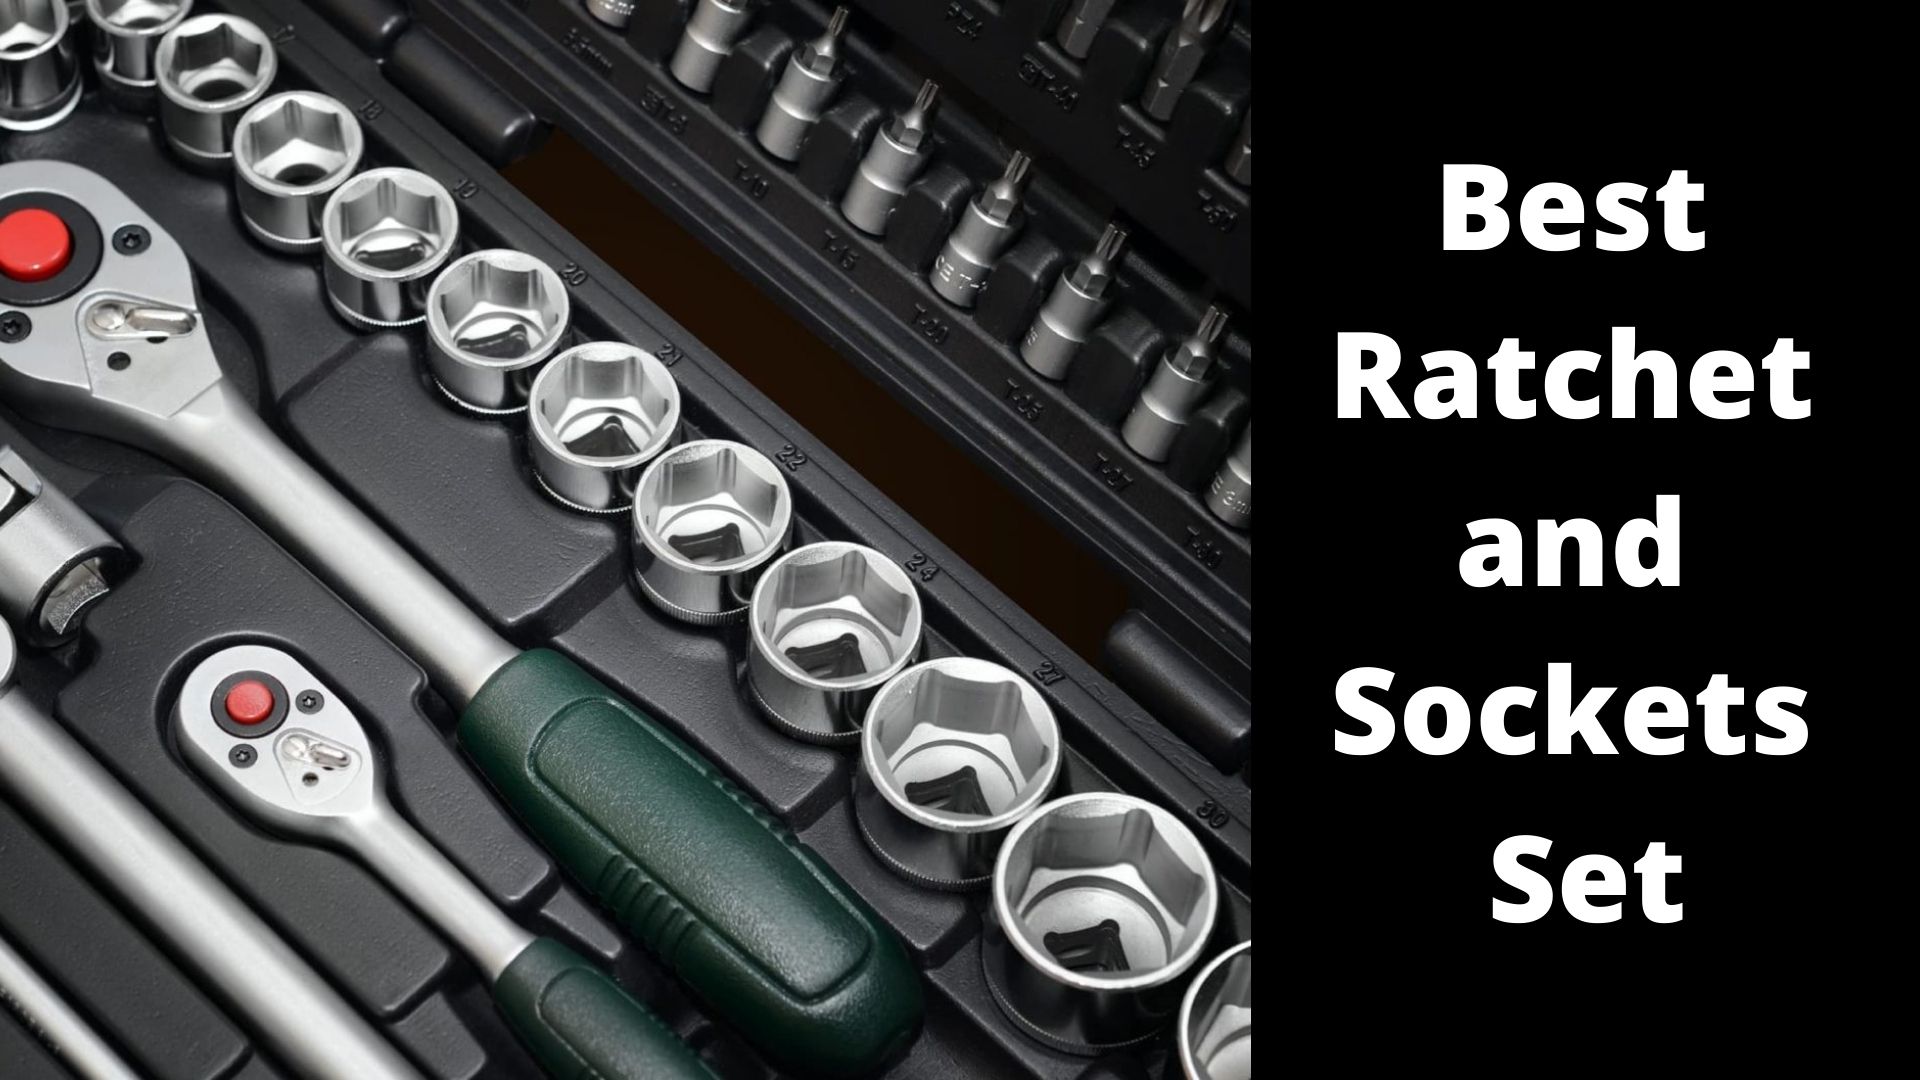 7 Best Ratchet And Sockets Set – Buyer’s Guide